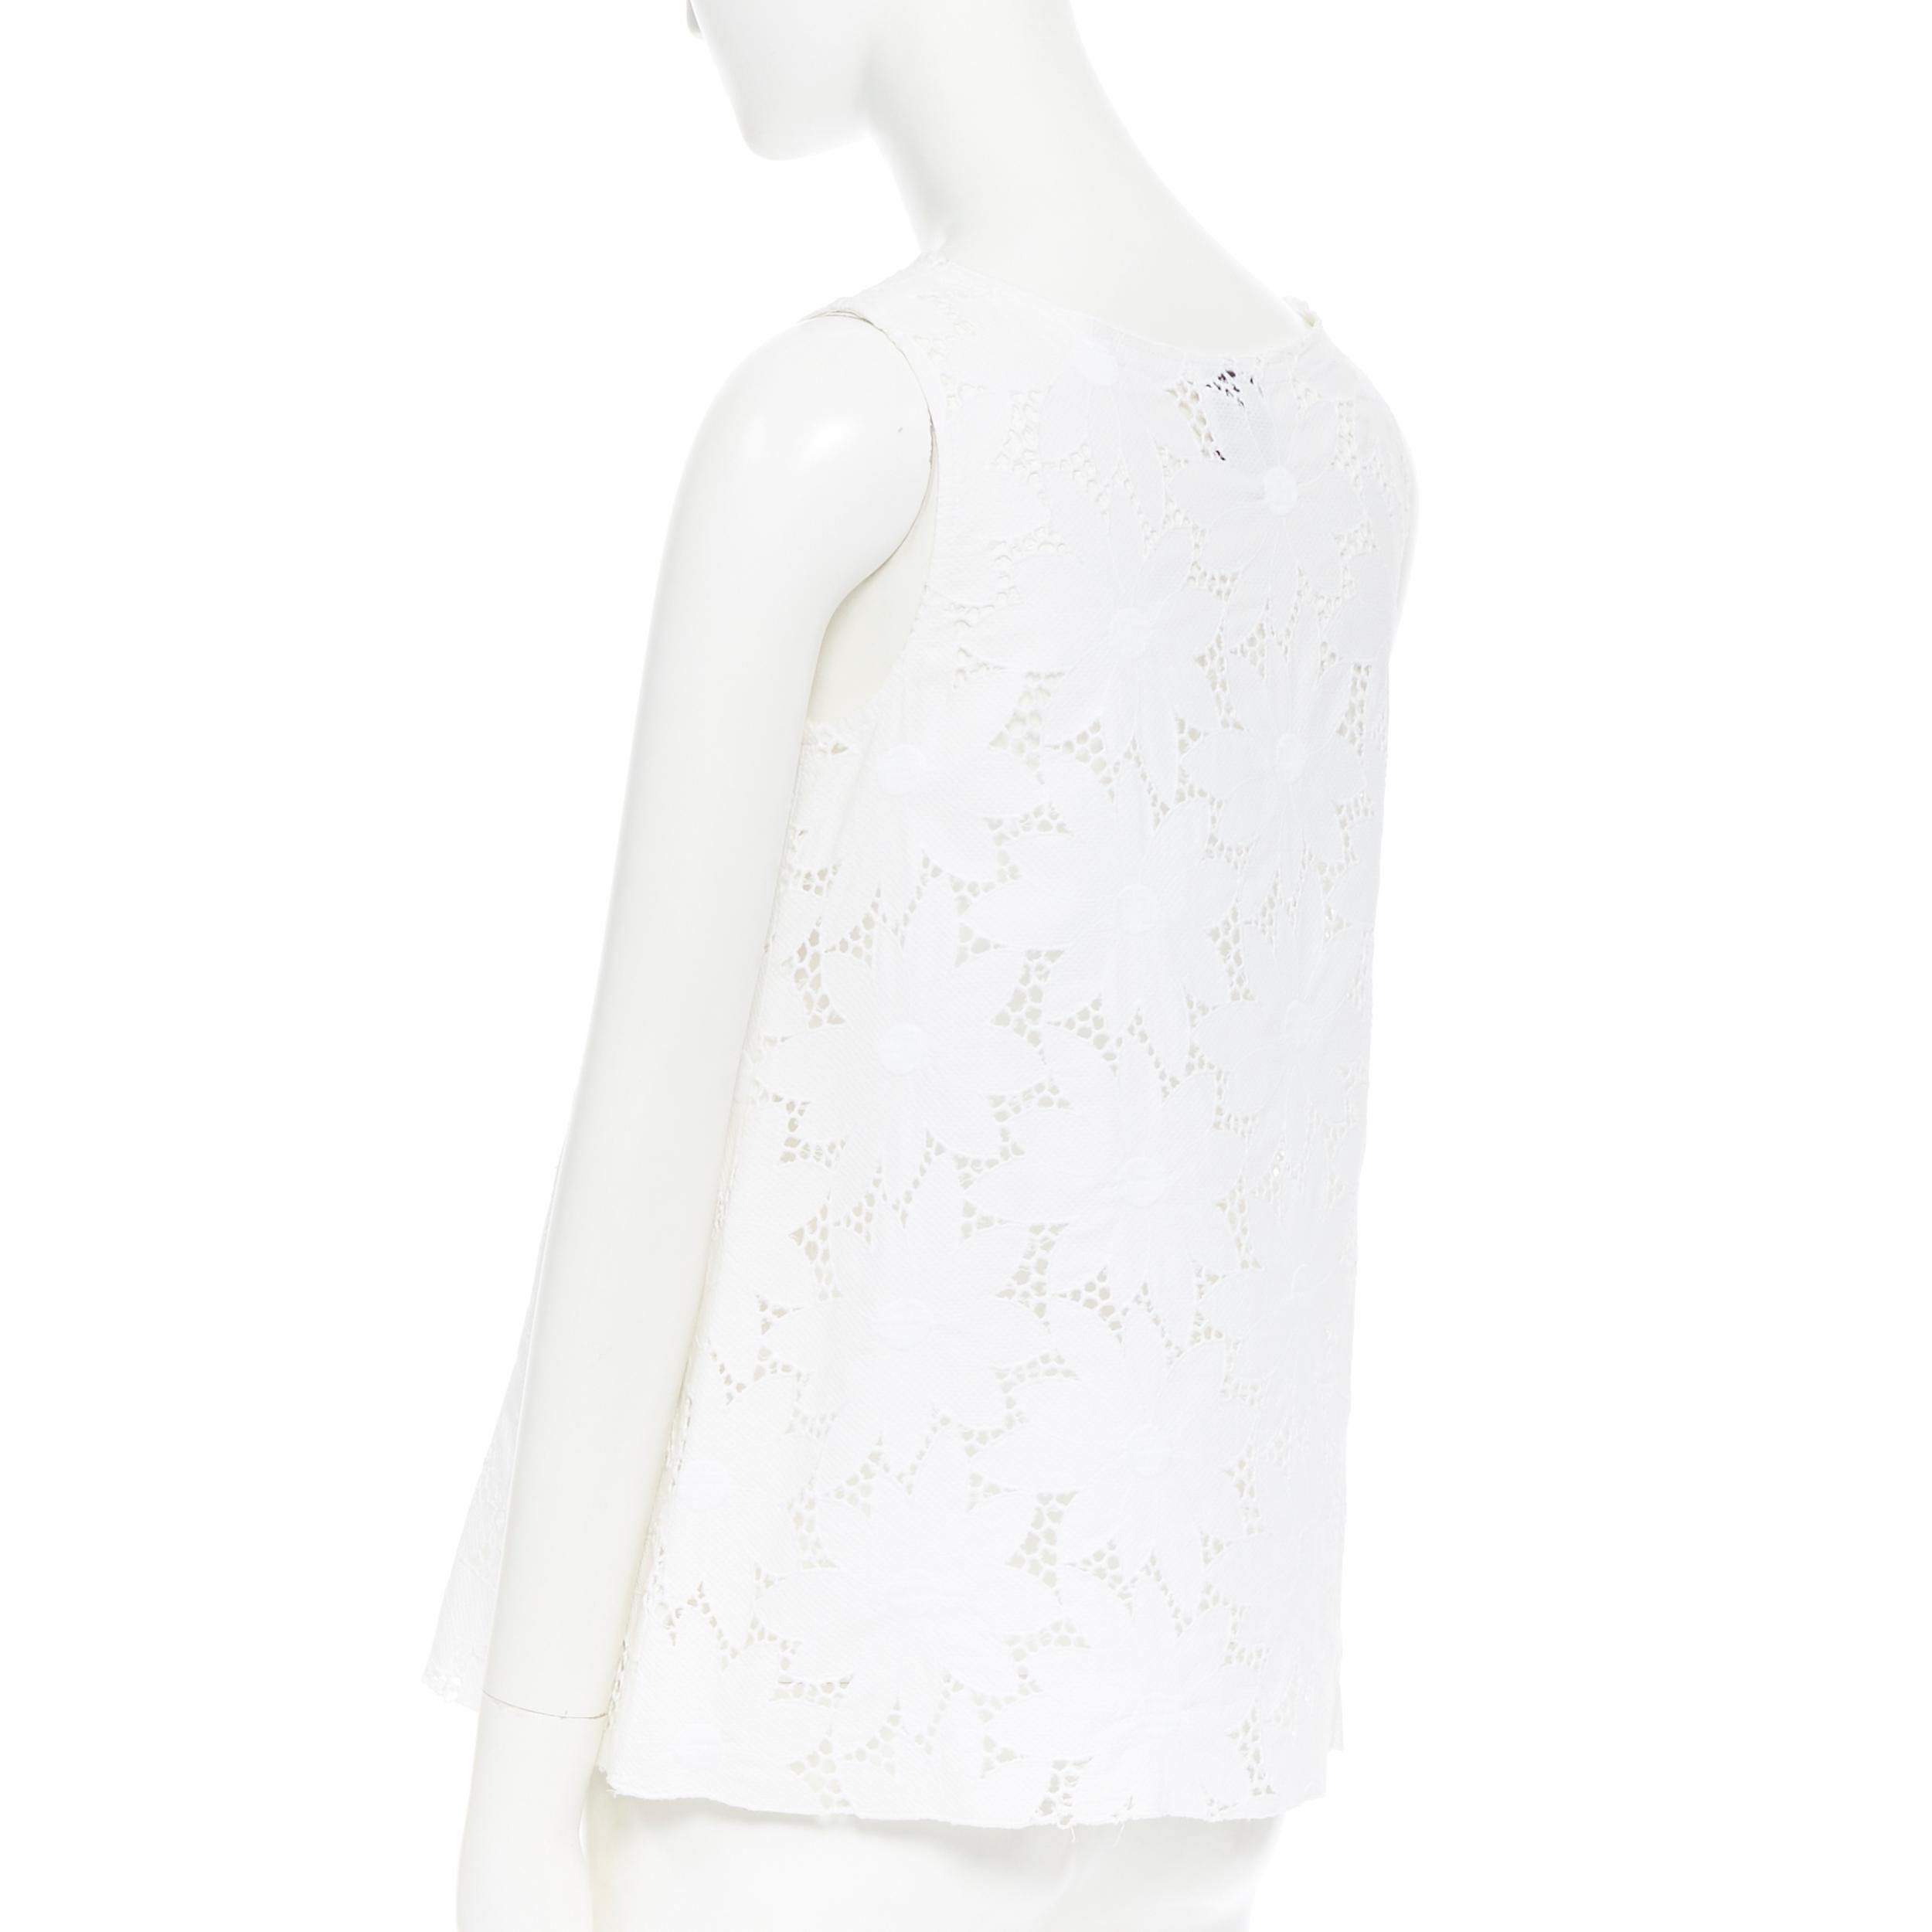 LISA PERRY 100% cotton white floral embroidery anglaise A-line sleeveless top S 3